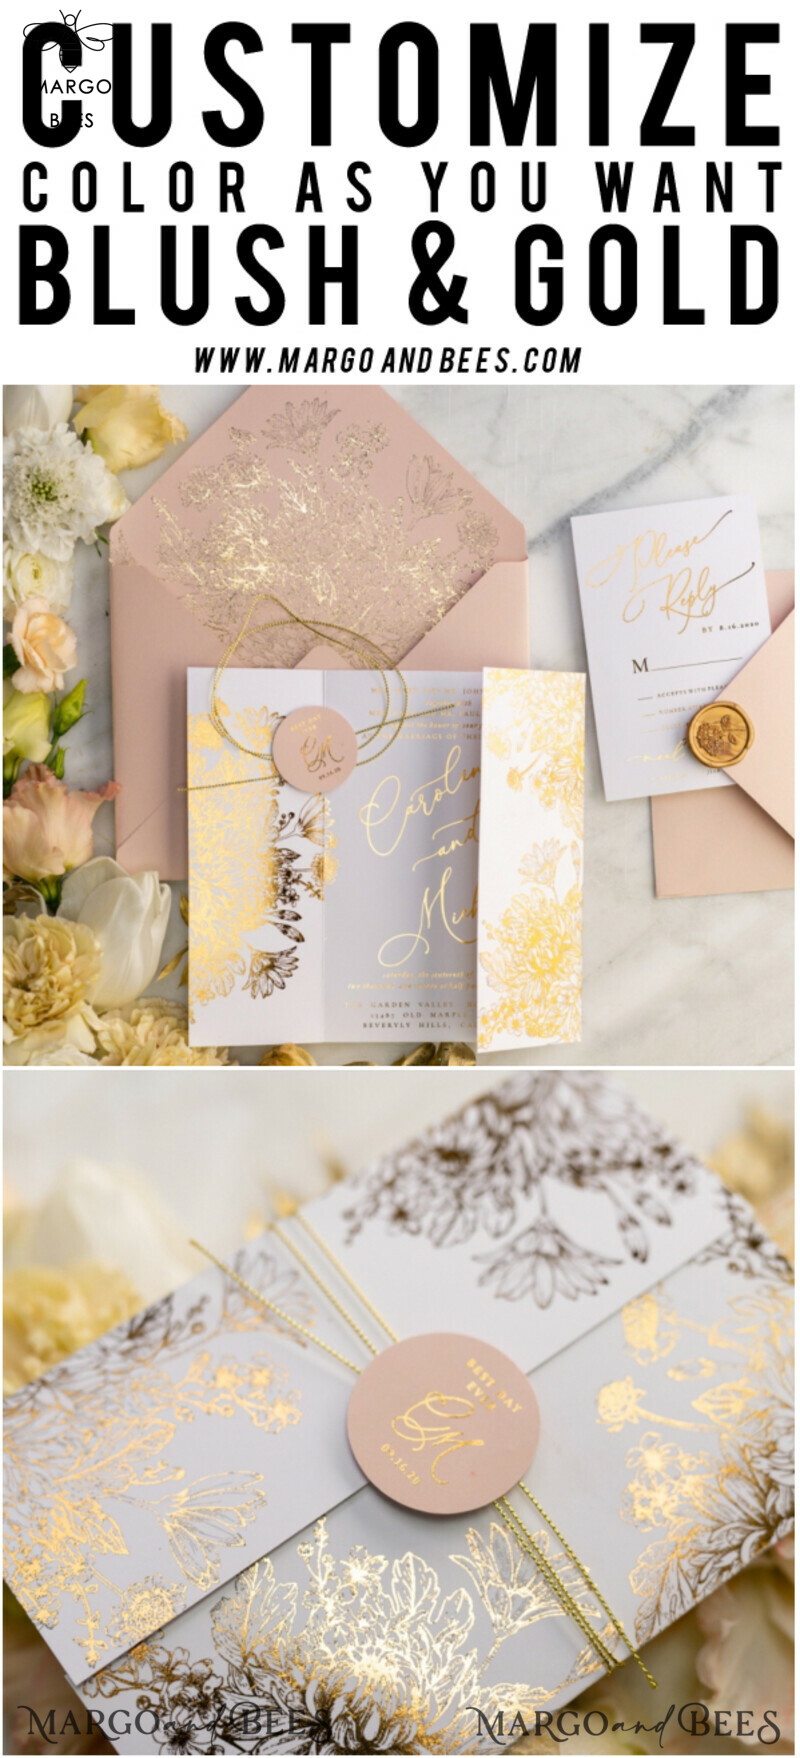 Exquisite Arabic Golden Wedding Invitations with Glamour Gold Foil and Romantic Blush Pink Touches: Bespoke Indian Wedding Stationery-38